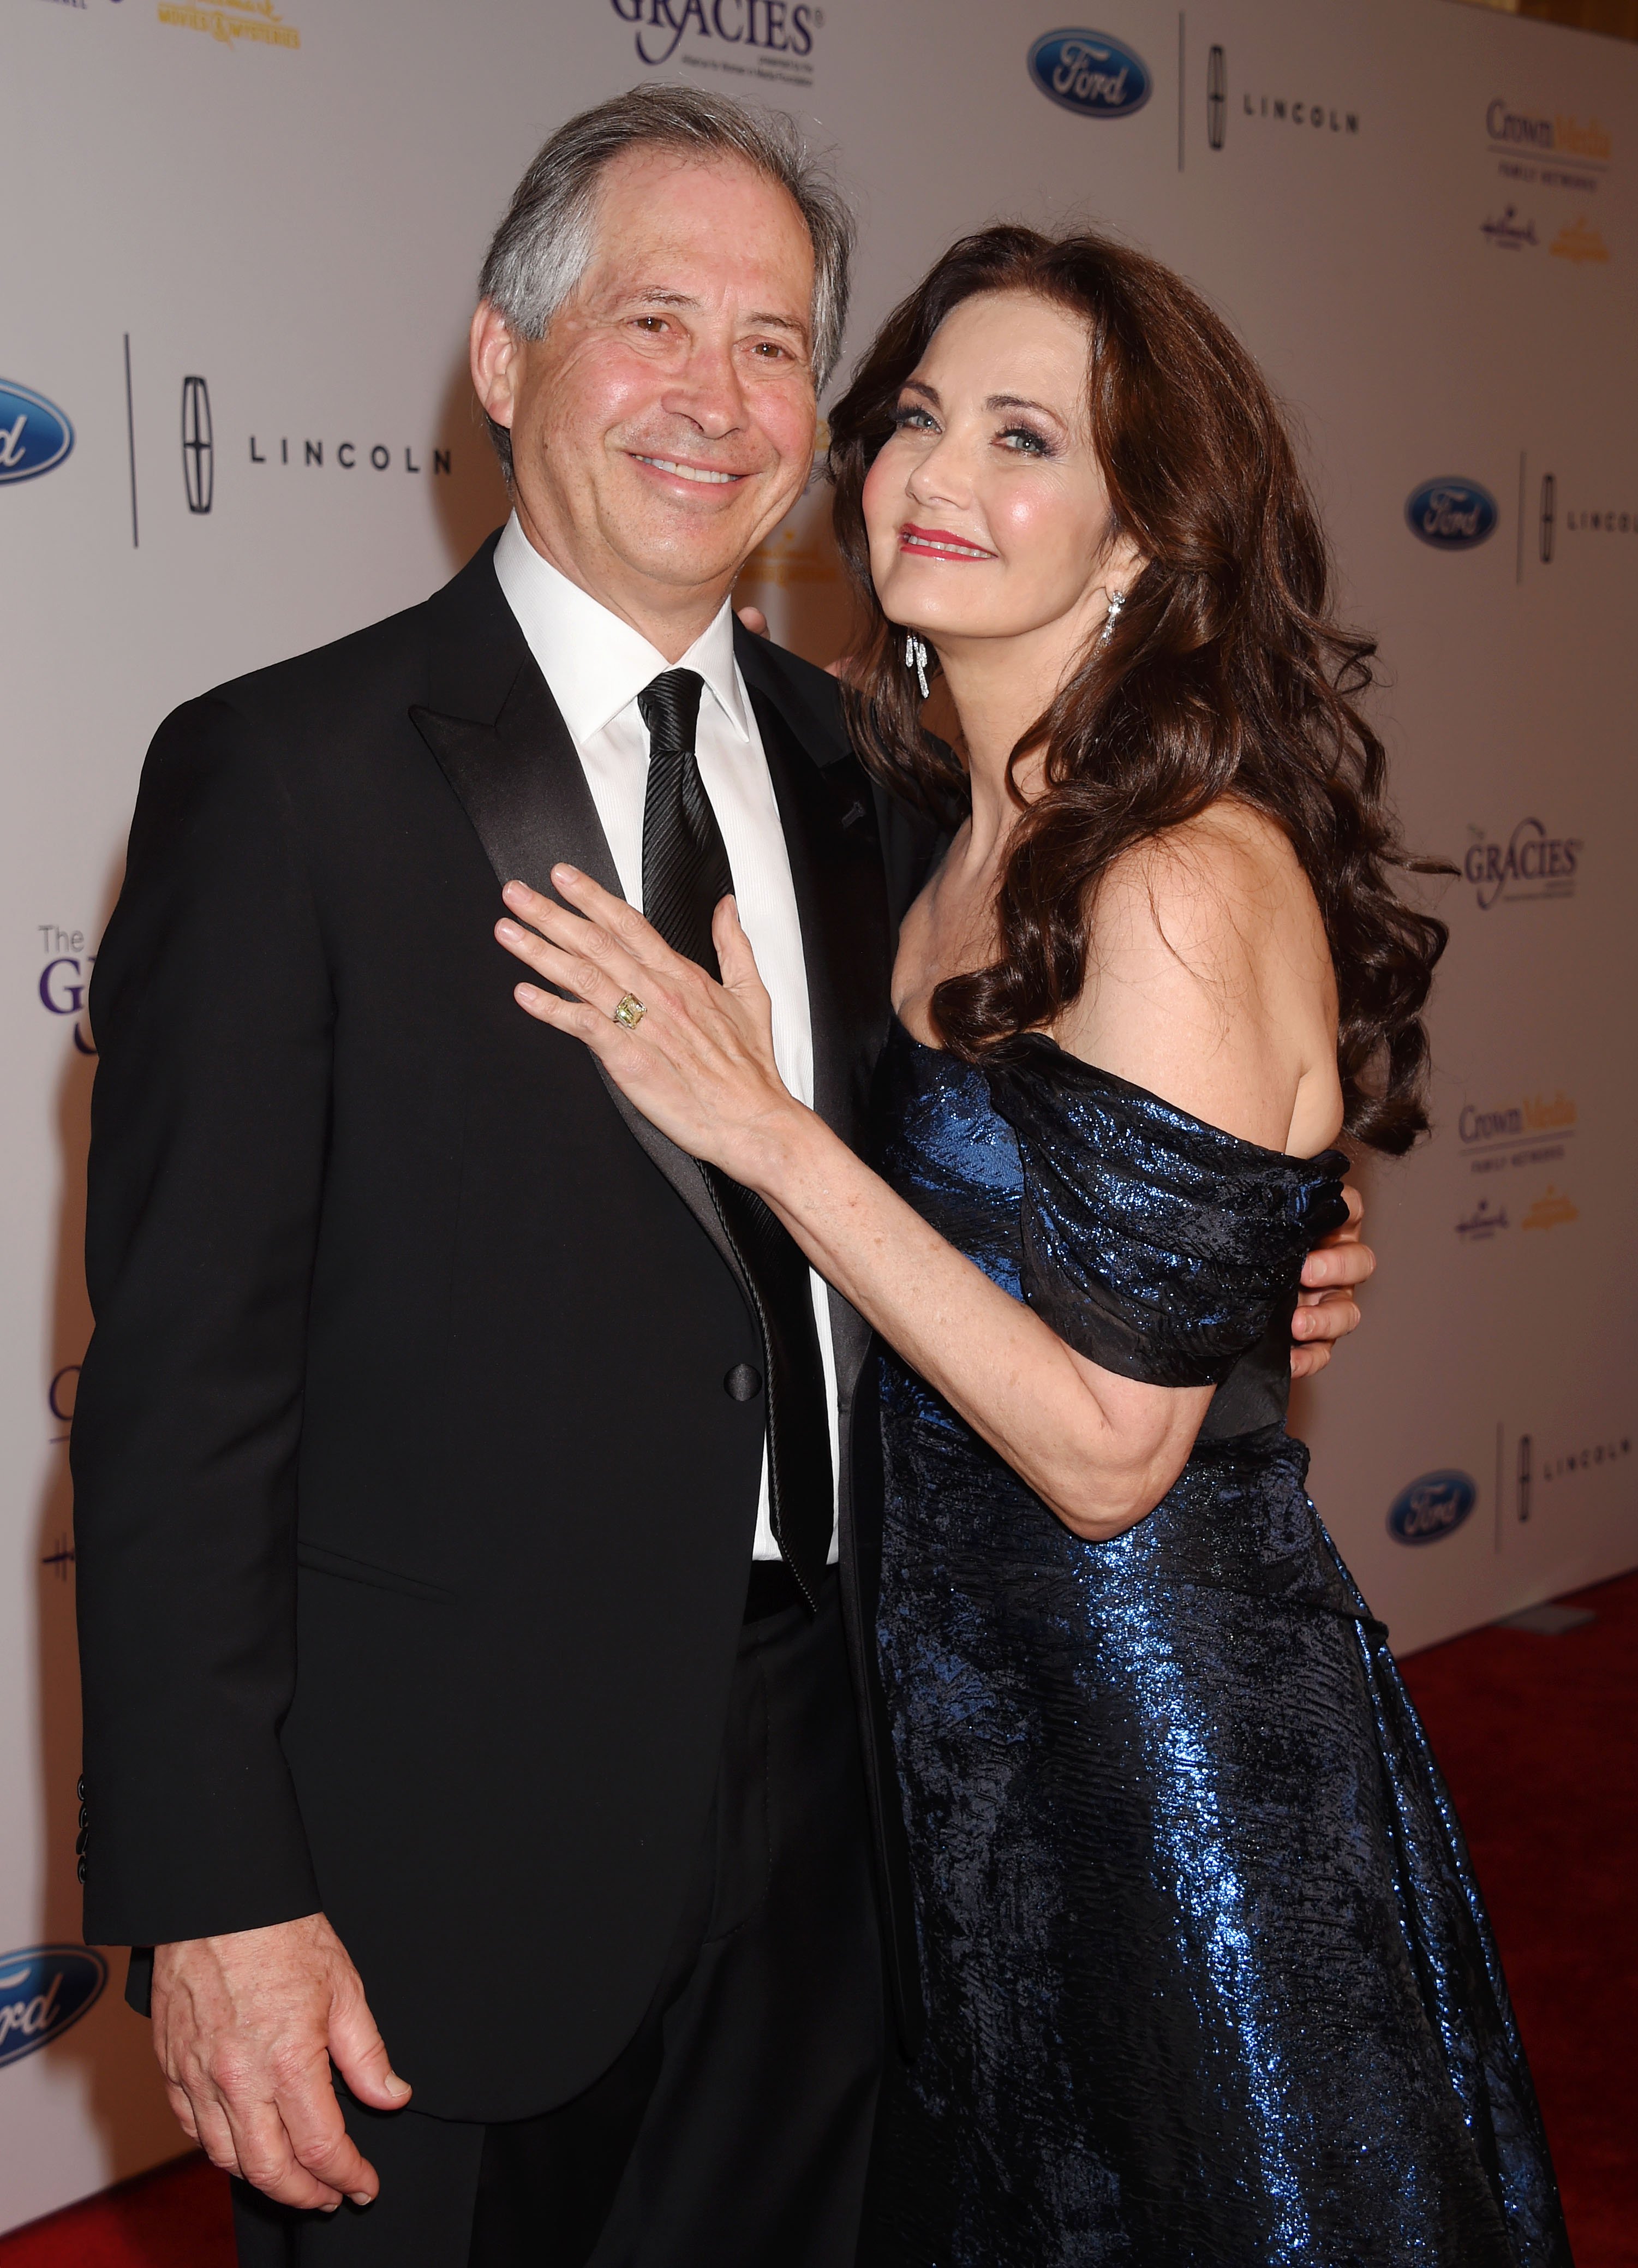 Lynda Carter and spouse/businesswoman Robert A. Altman attend the 41st Annual Gracie Awards Ceremony at the Regent Beverly Wilshire Hotel on May 24, 2016 |  Photo: Getty Images